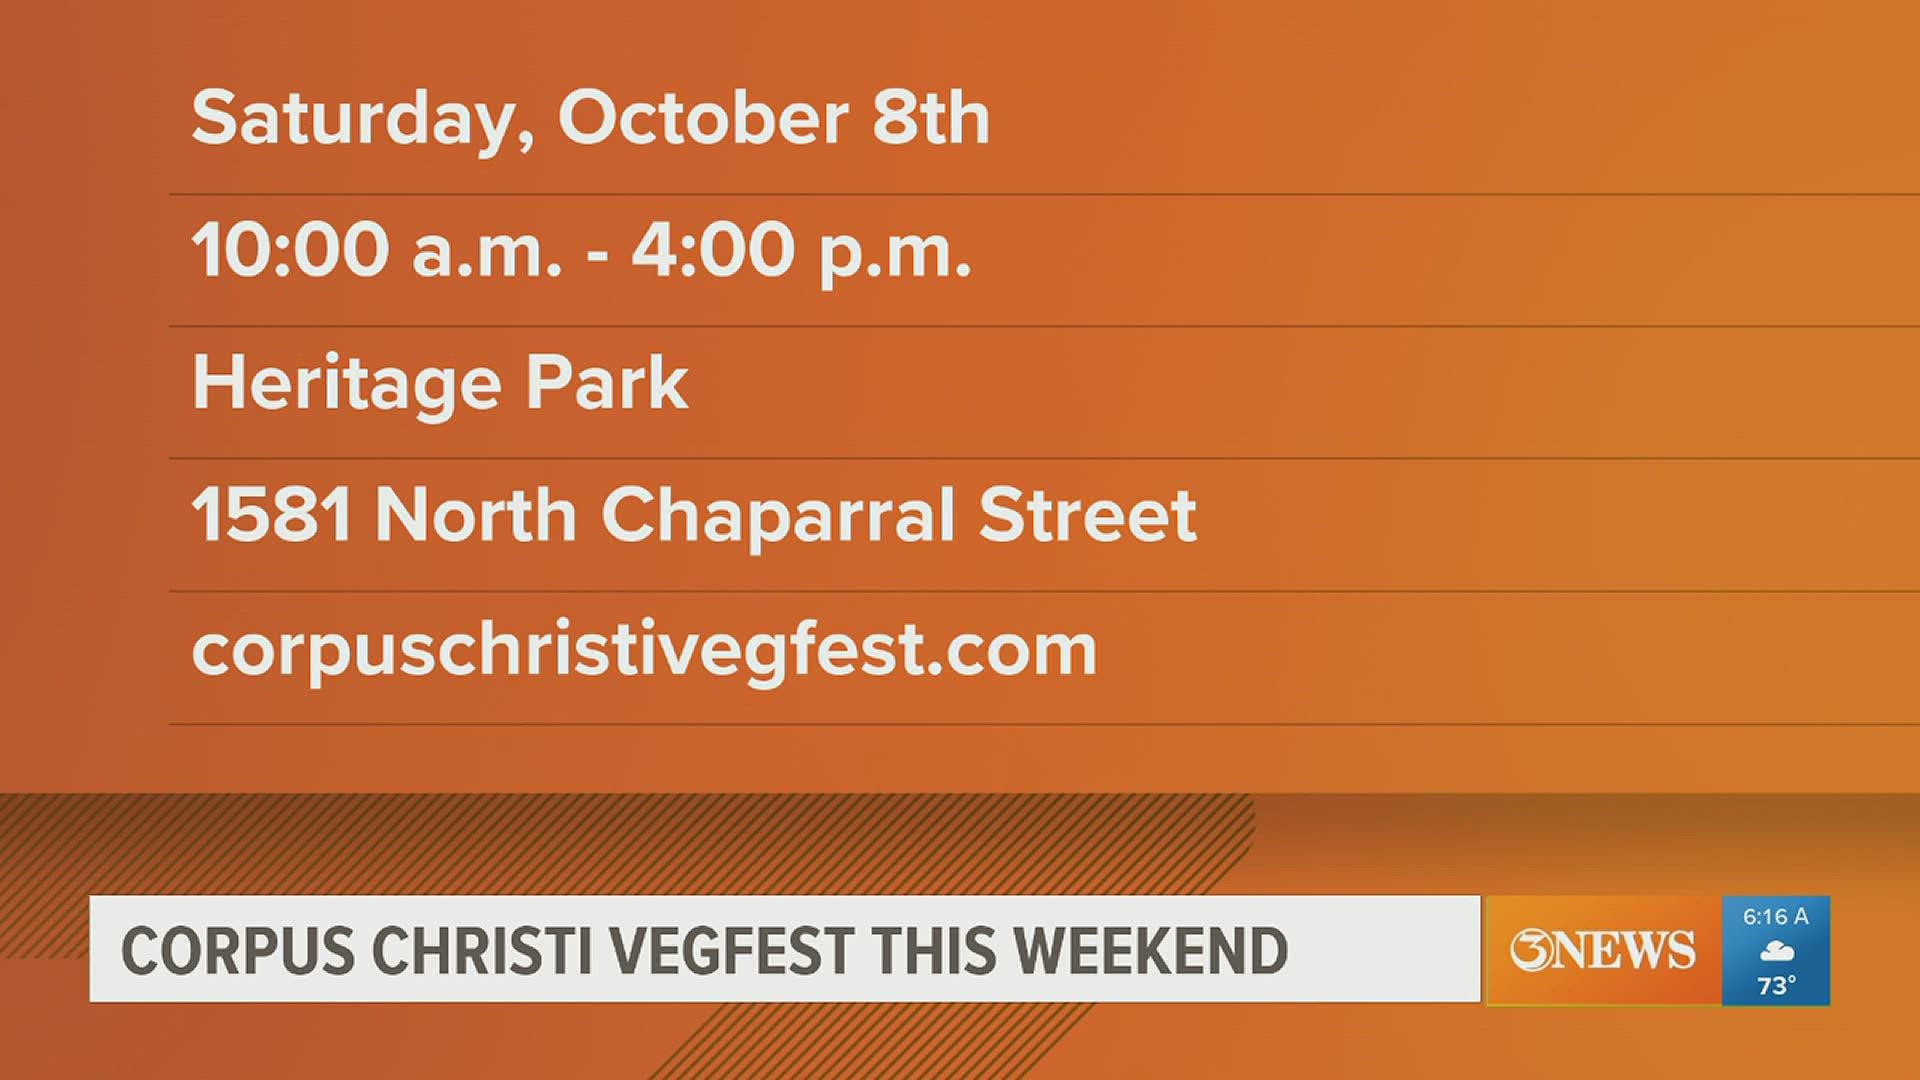 Corpus Christi VegFest organizer Sonny Rodriguez gives us a sneak peek of what to expect at this year's VegFest.